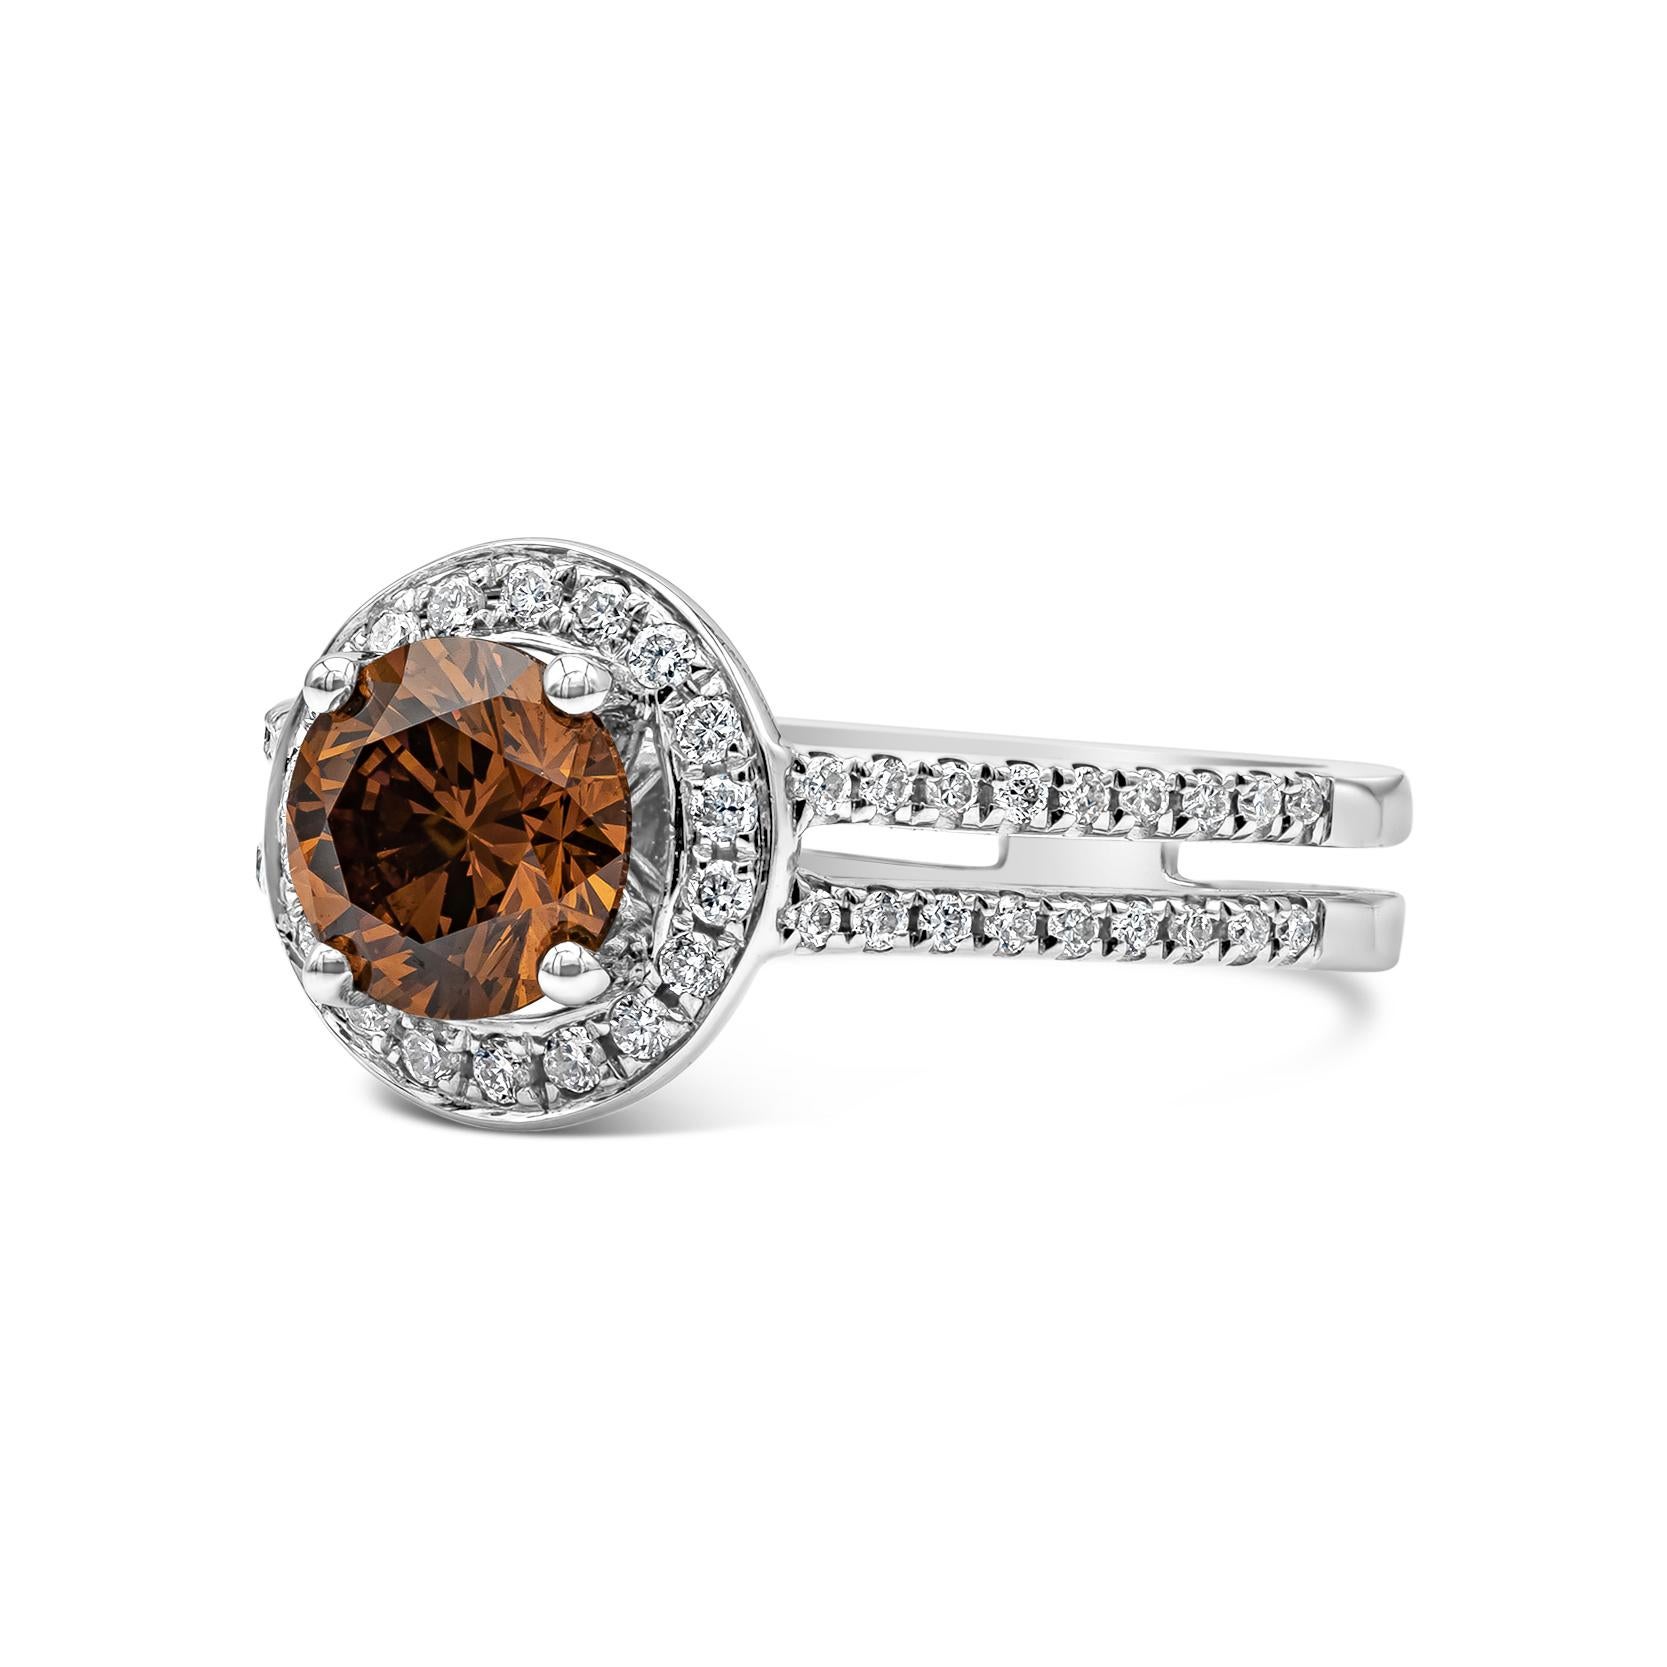 Showcasing a very vibrant 1.05 carat round diamond certified by GIA as Fancy Deep Brownish Yellow Orange Color, SI2 Clarity. Surrounding the center diamond are round brilliant white diamonds in a double shank mounting. Finely Made in 18K White